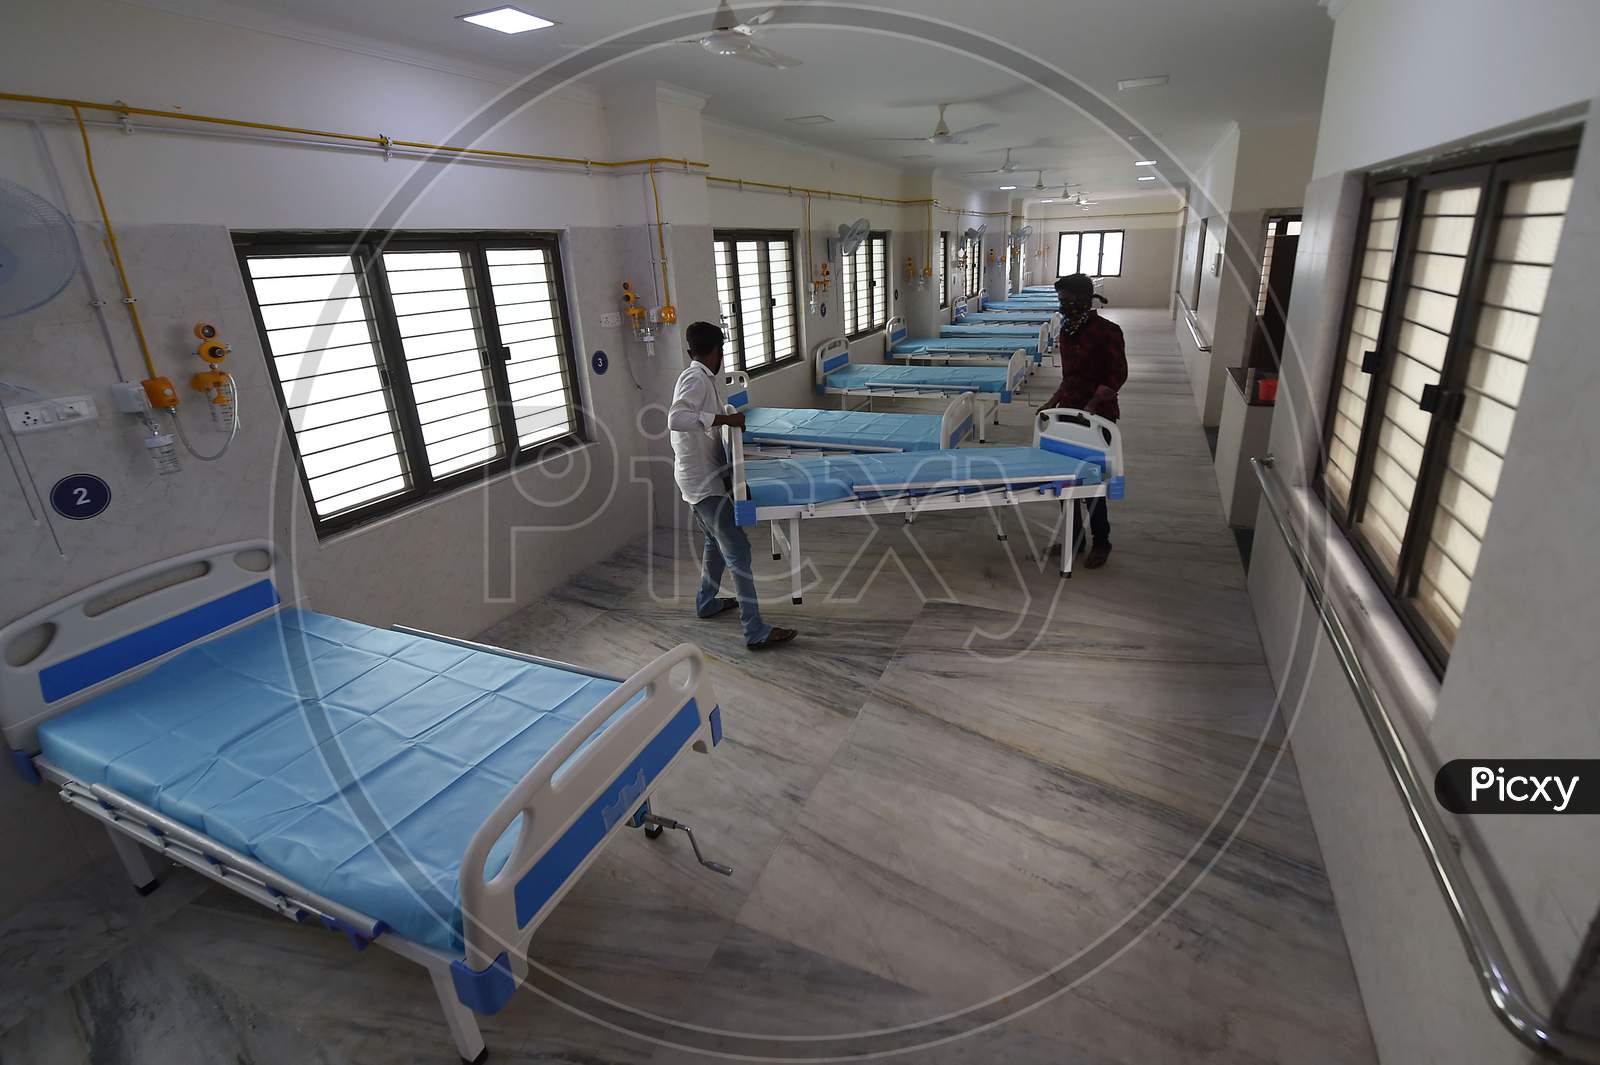 Health workers arrange beds to convert a building which belonged to the National Institute of Ageing into a dedicated Covid-19 Care Centre in Chennai, TamilNadu on July 07, 2020